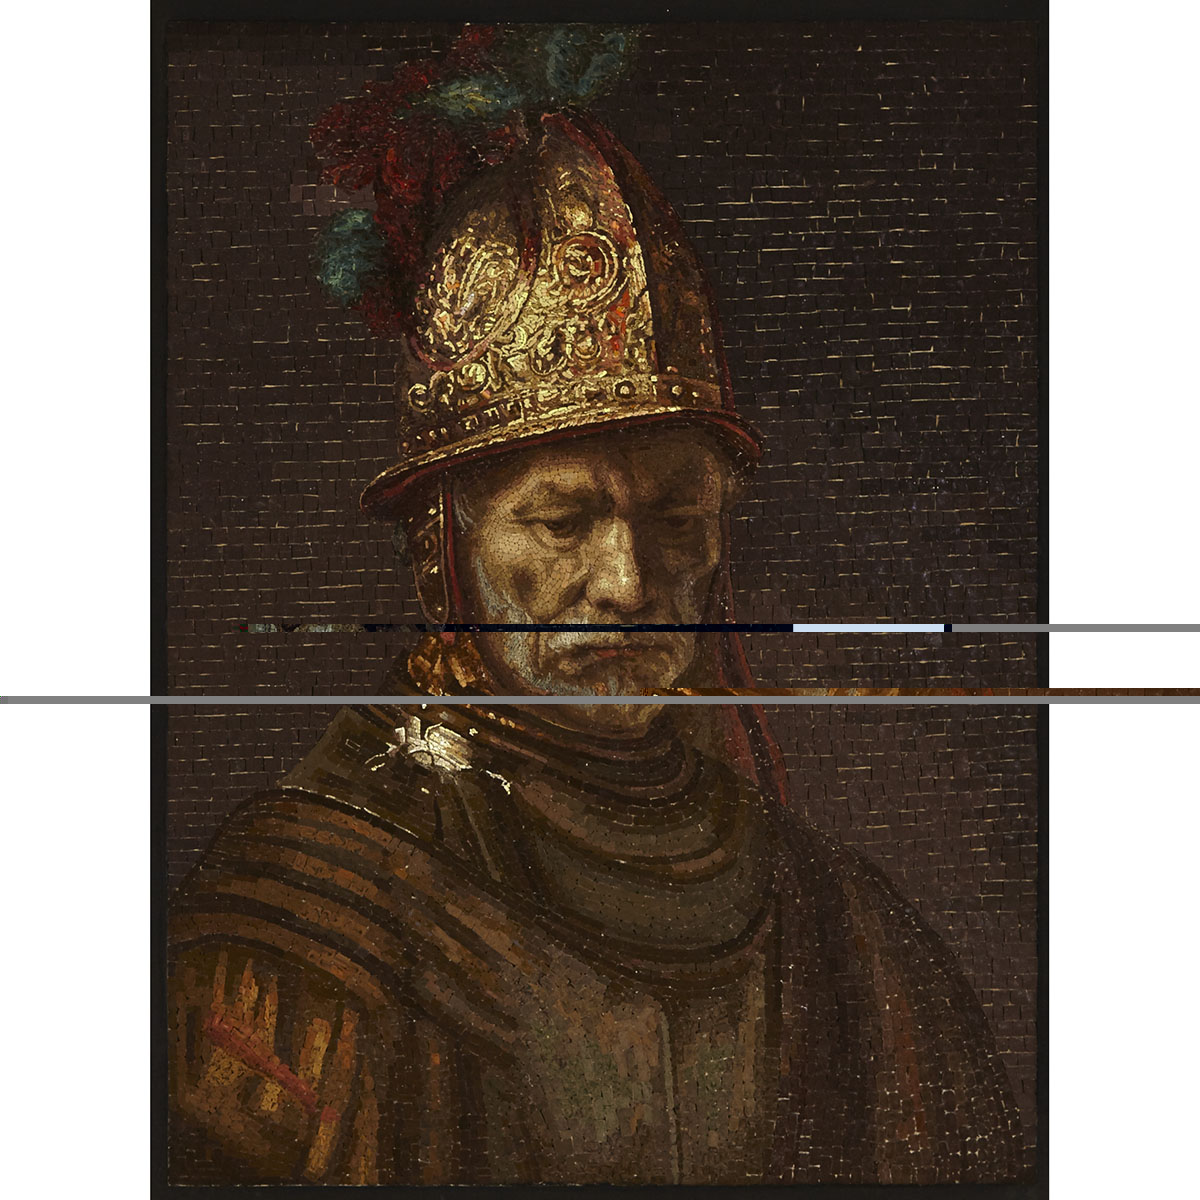 Vatican Mosaic Studio Large Micro Mosaic Picture of ‘The Man in The Golden Helmet’, after Rembrandt, early-mid 20th century